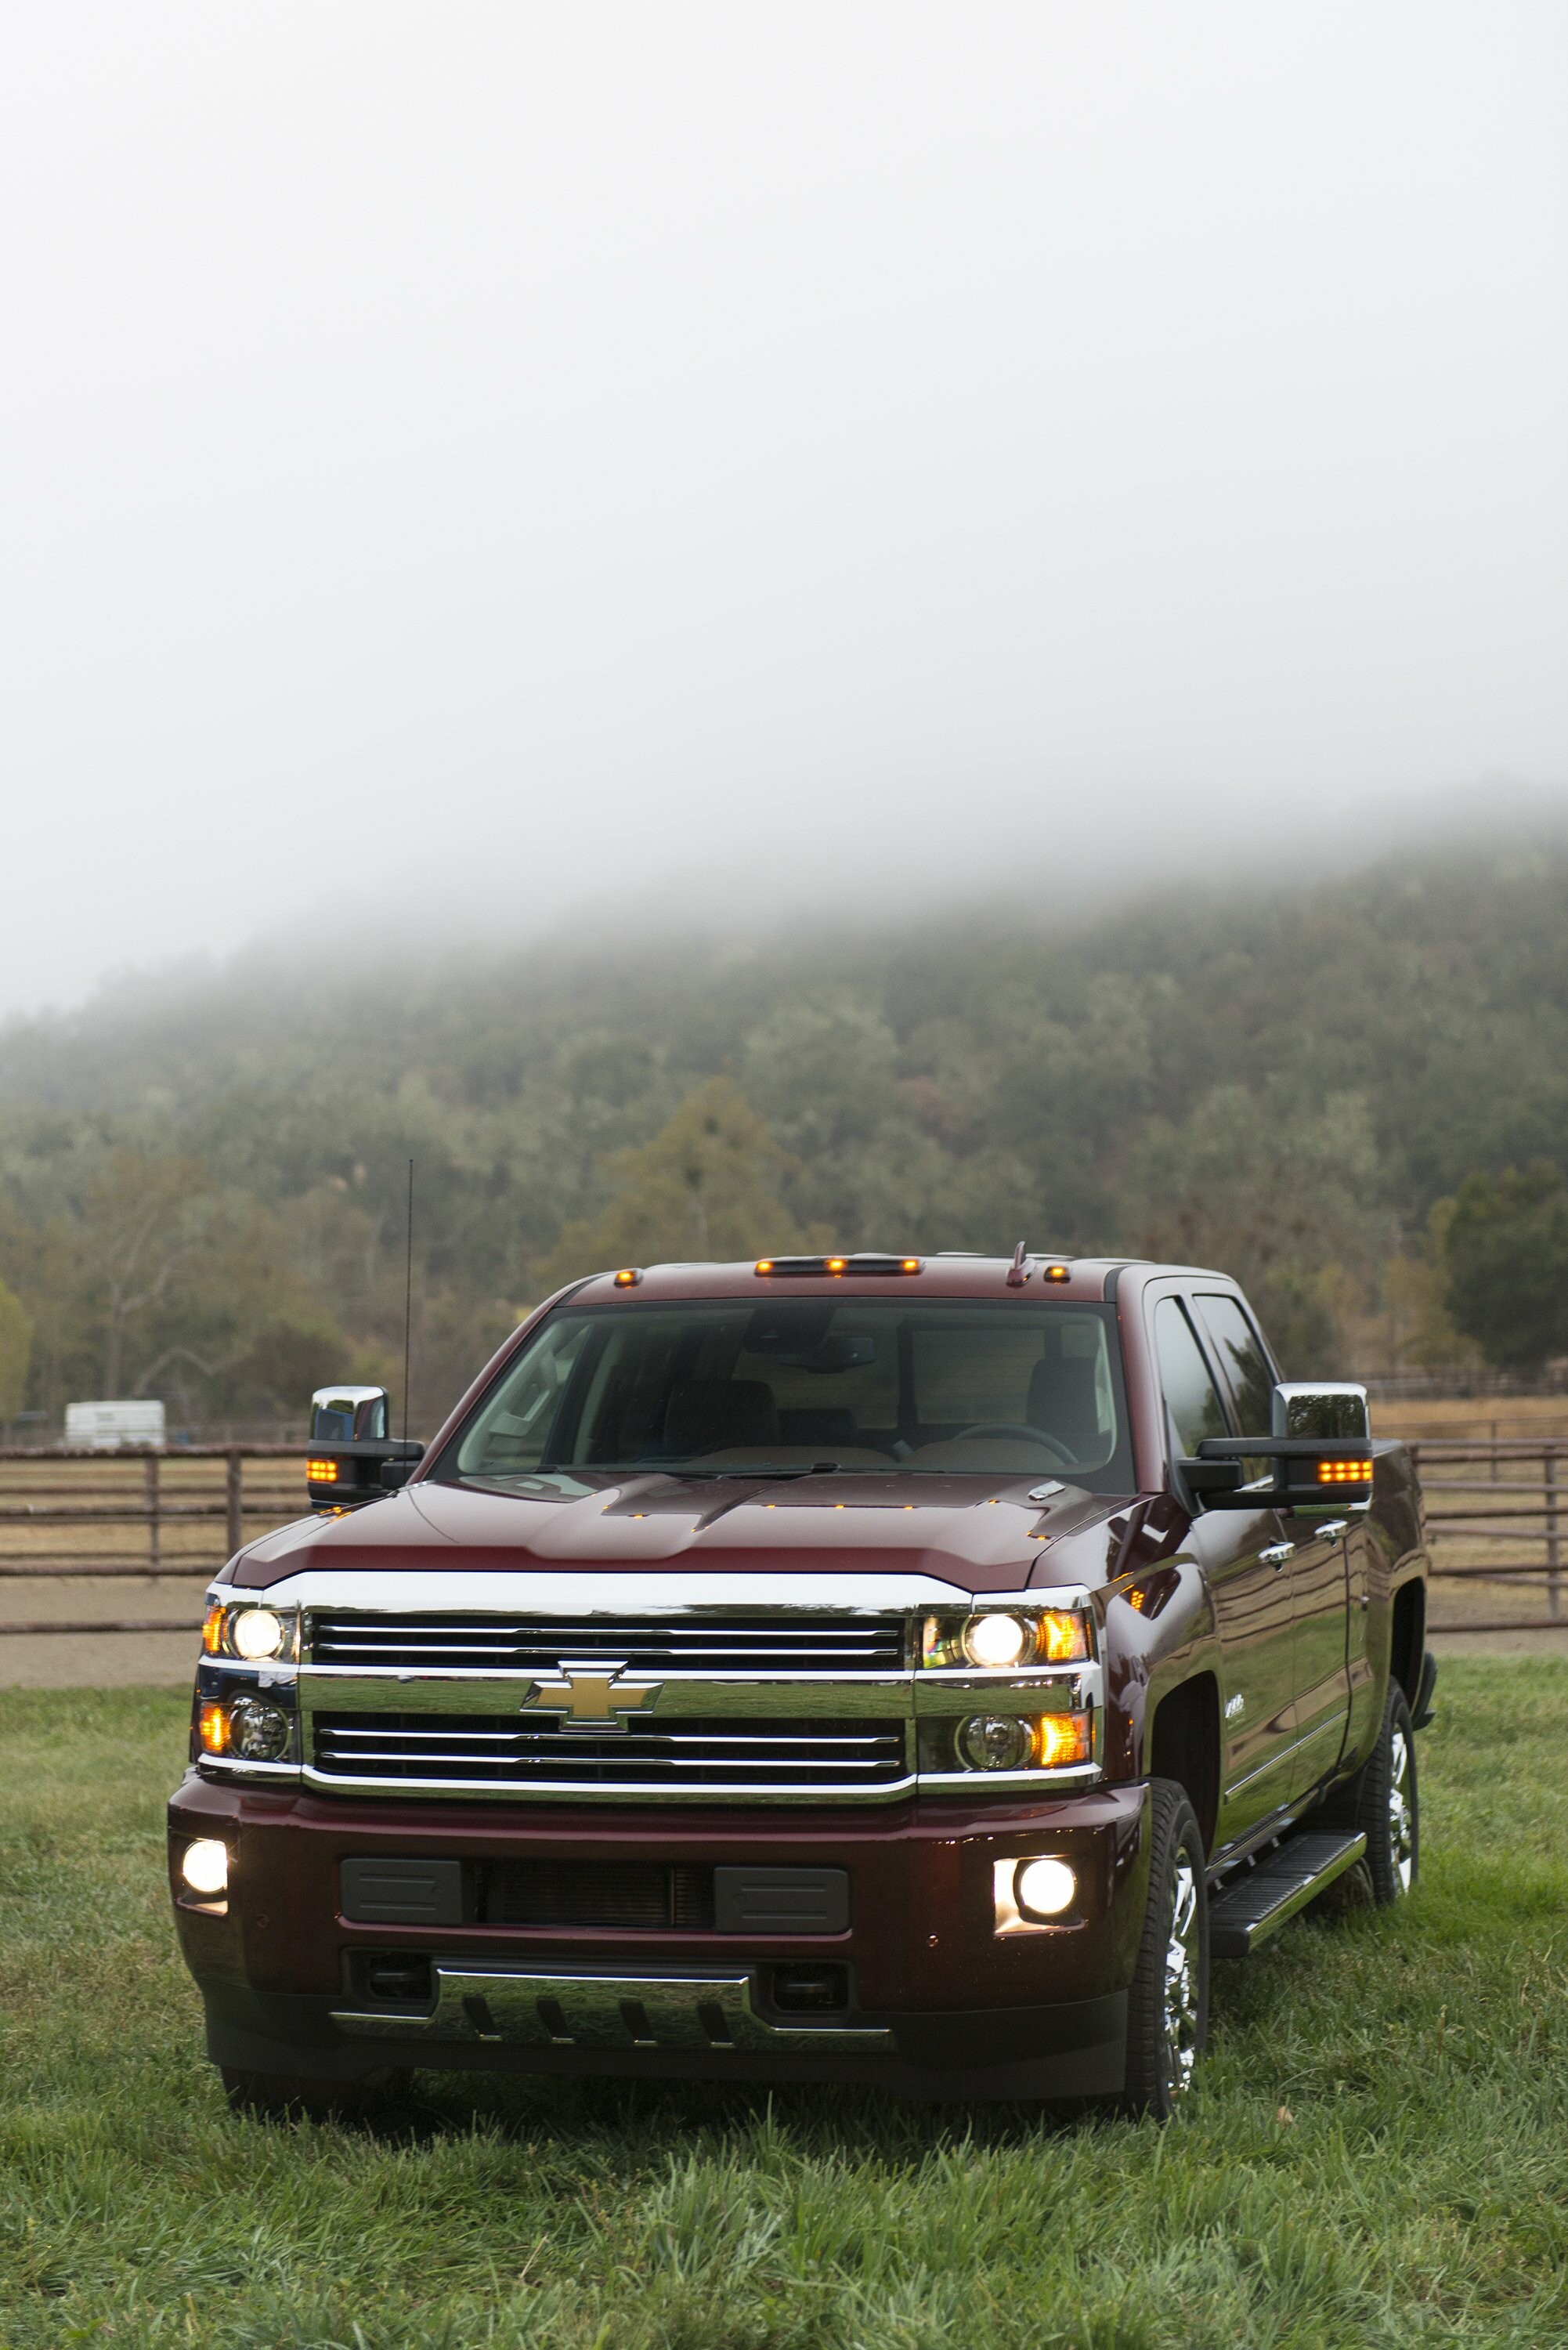 Chevrolet Silverado: 2500 HD, Crew Cab, Chevy pickup, One of the brand’s toughest trucks. 2010x3000 HD Background.